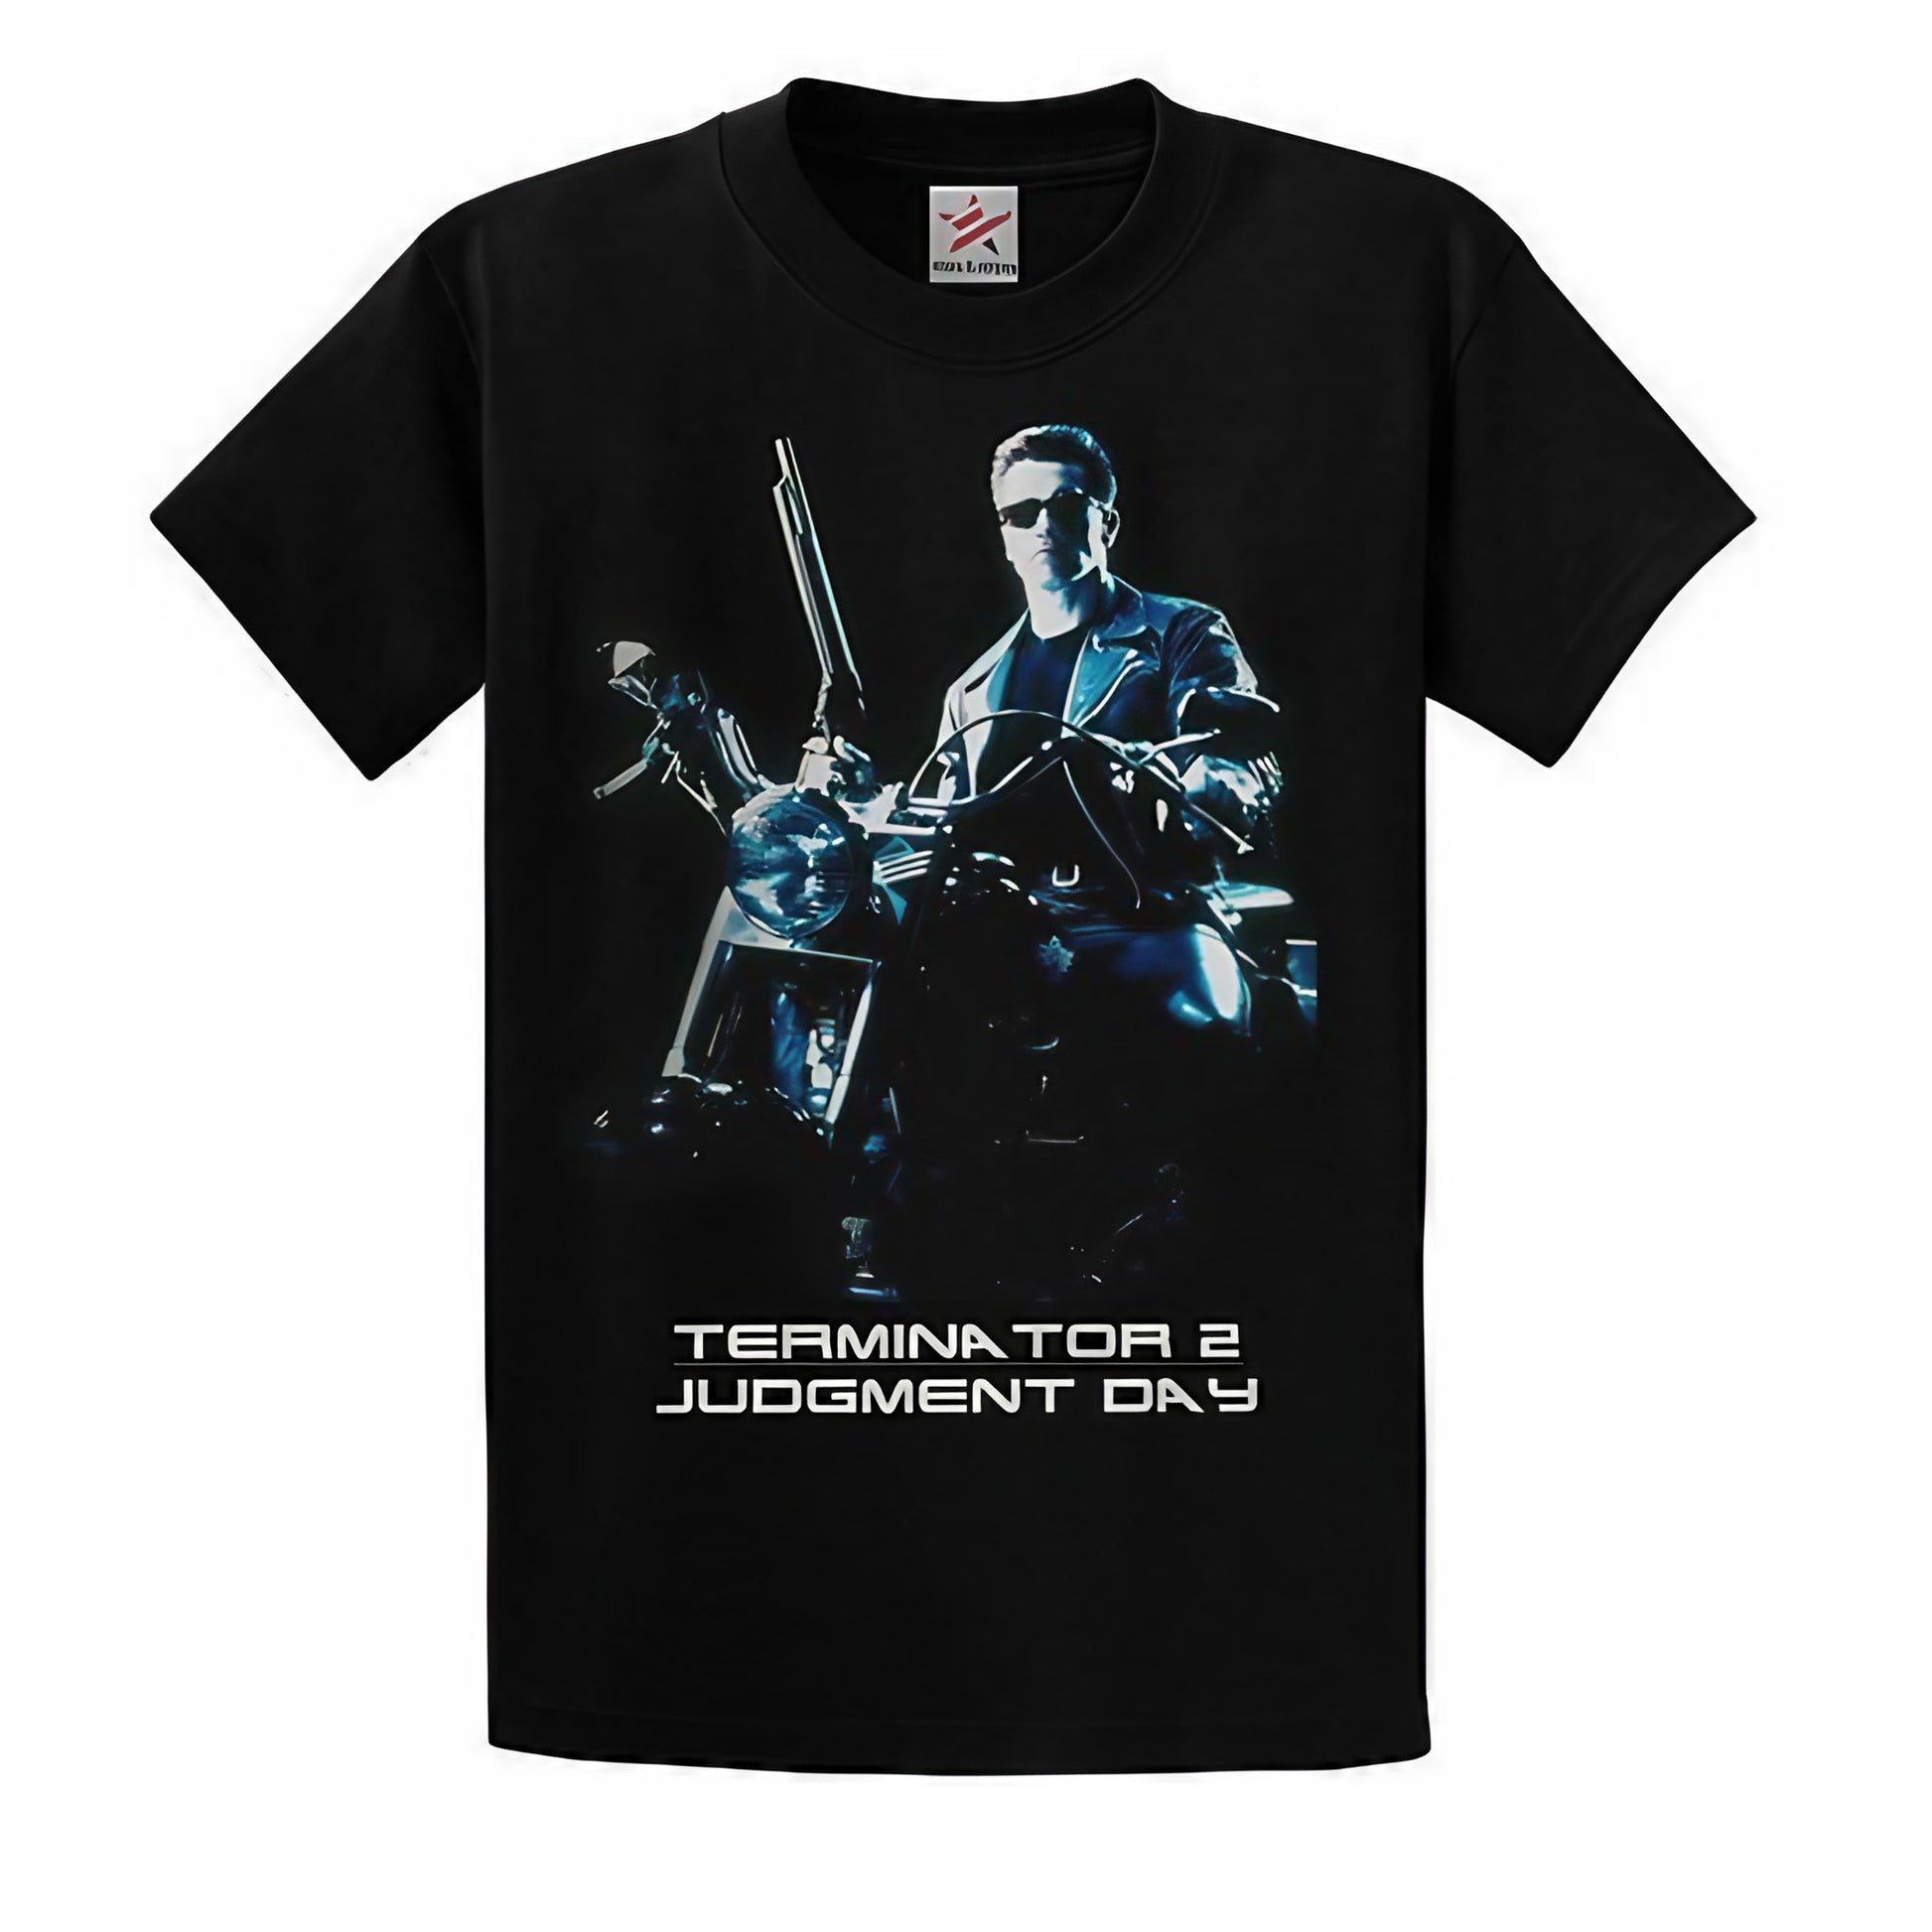 Black T-shirt featuring the Terminator in a bike pose graphic